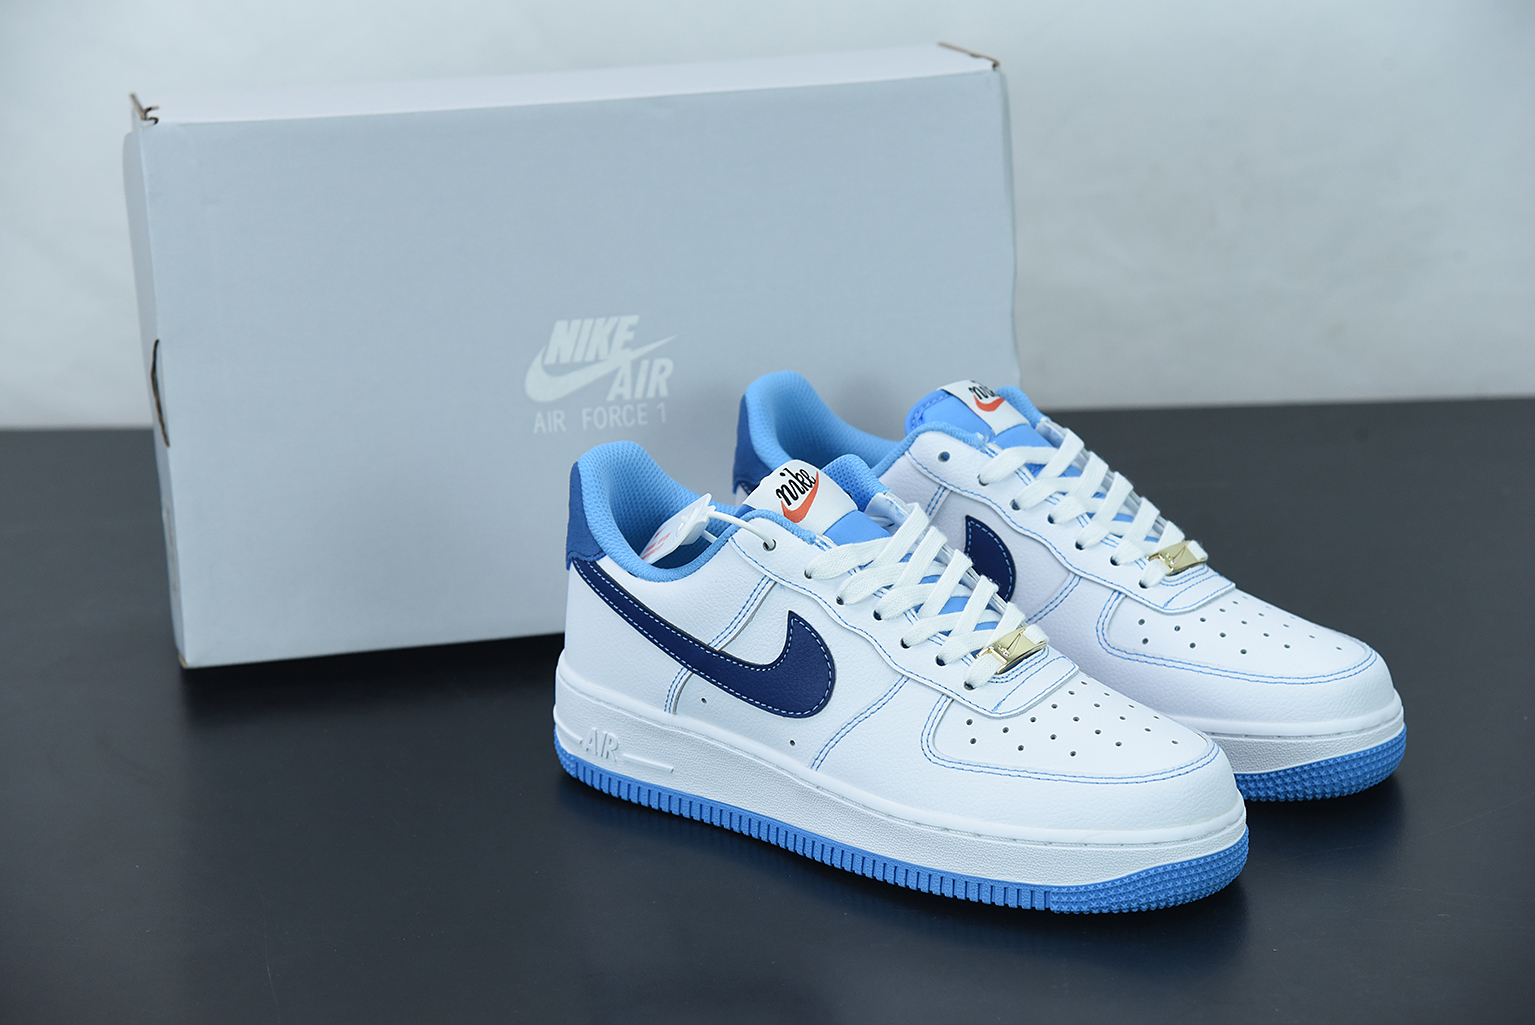 Nike Air Force 1 Low “First Use” White/University Blue DA8478 - 100 For Sale – Tra-incShops - nike air max 270 dame washed